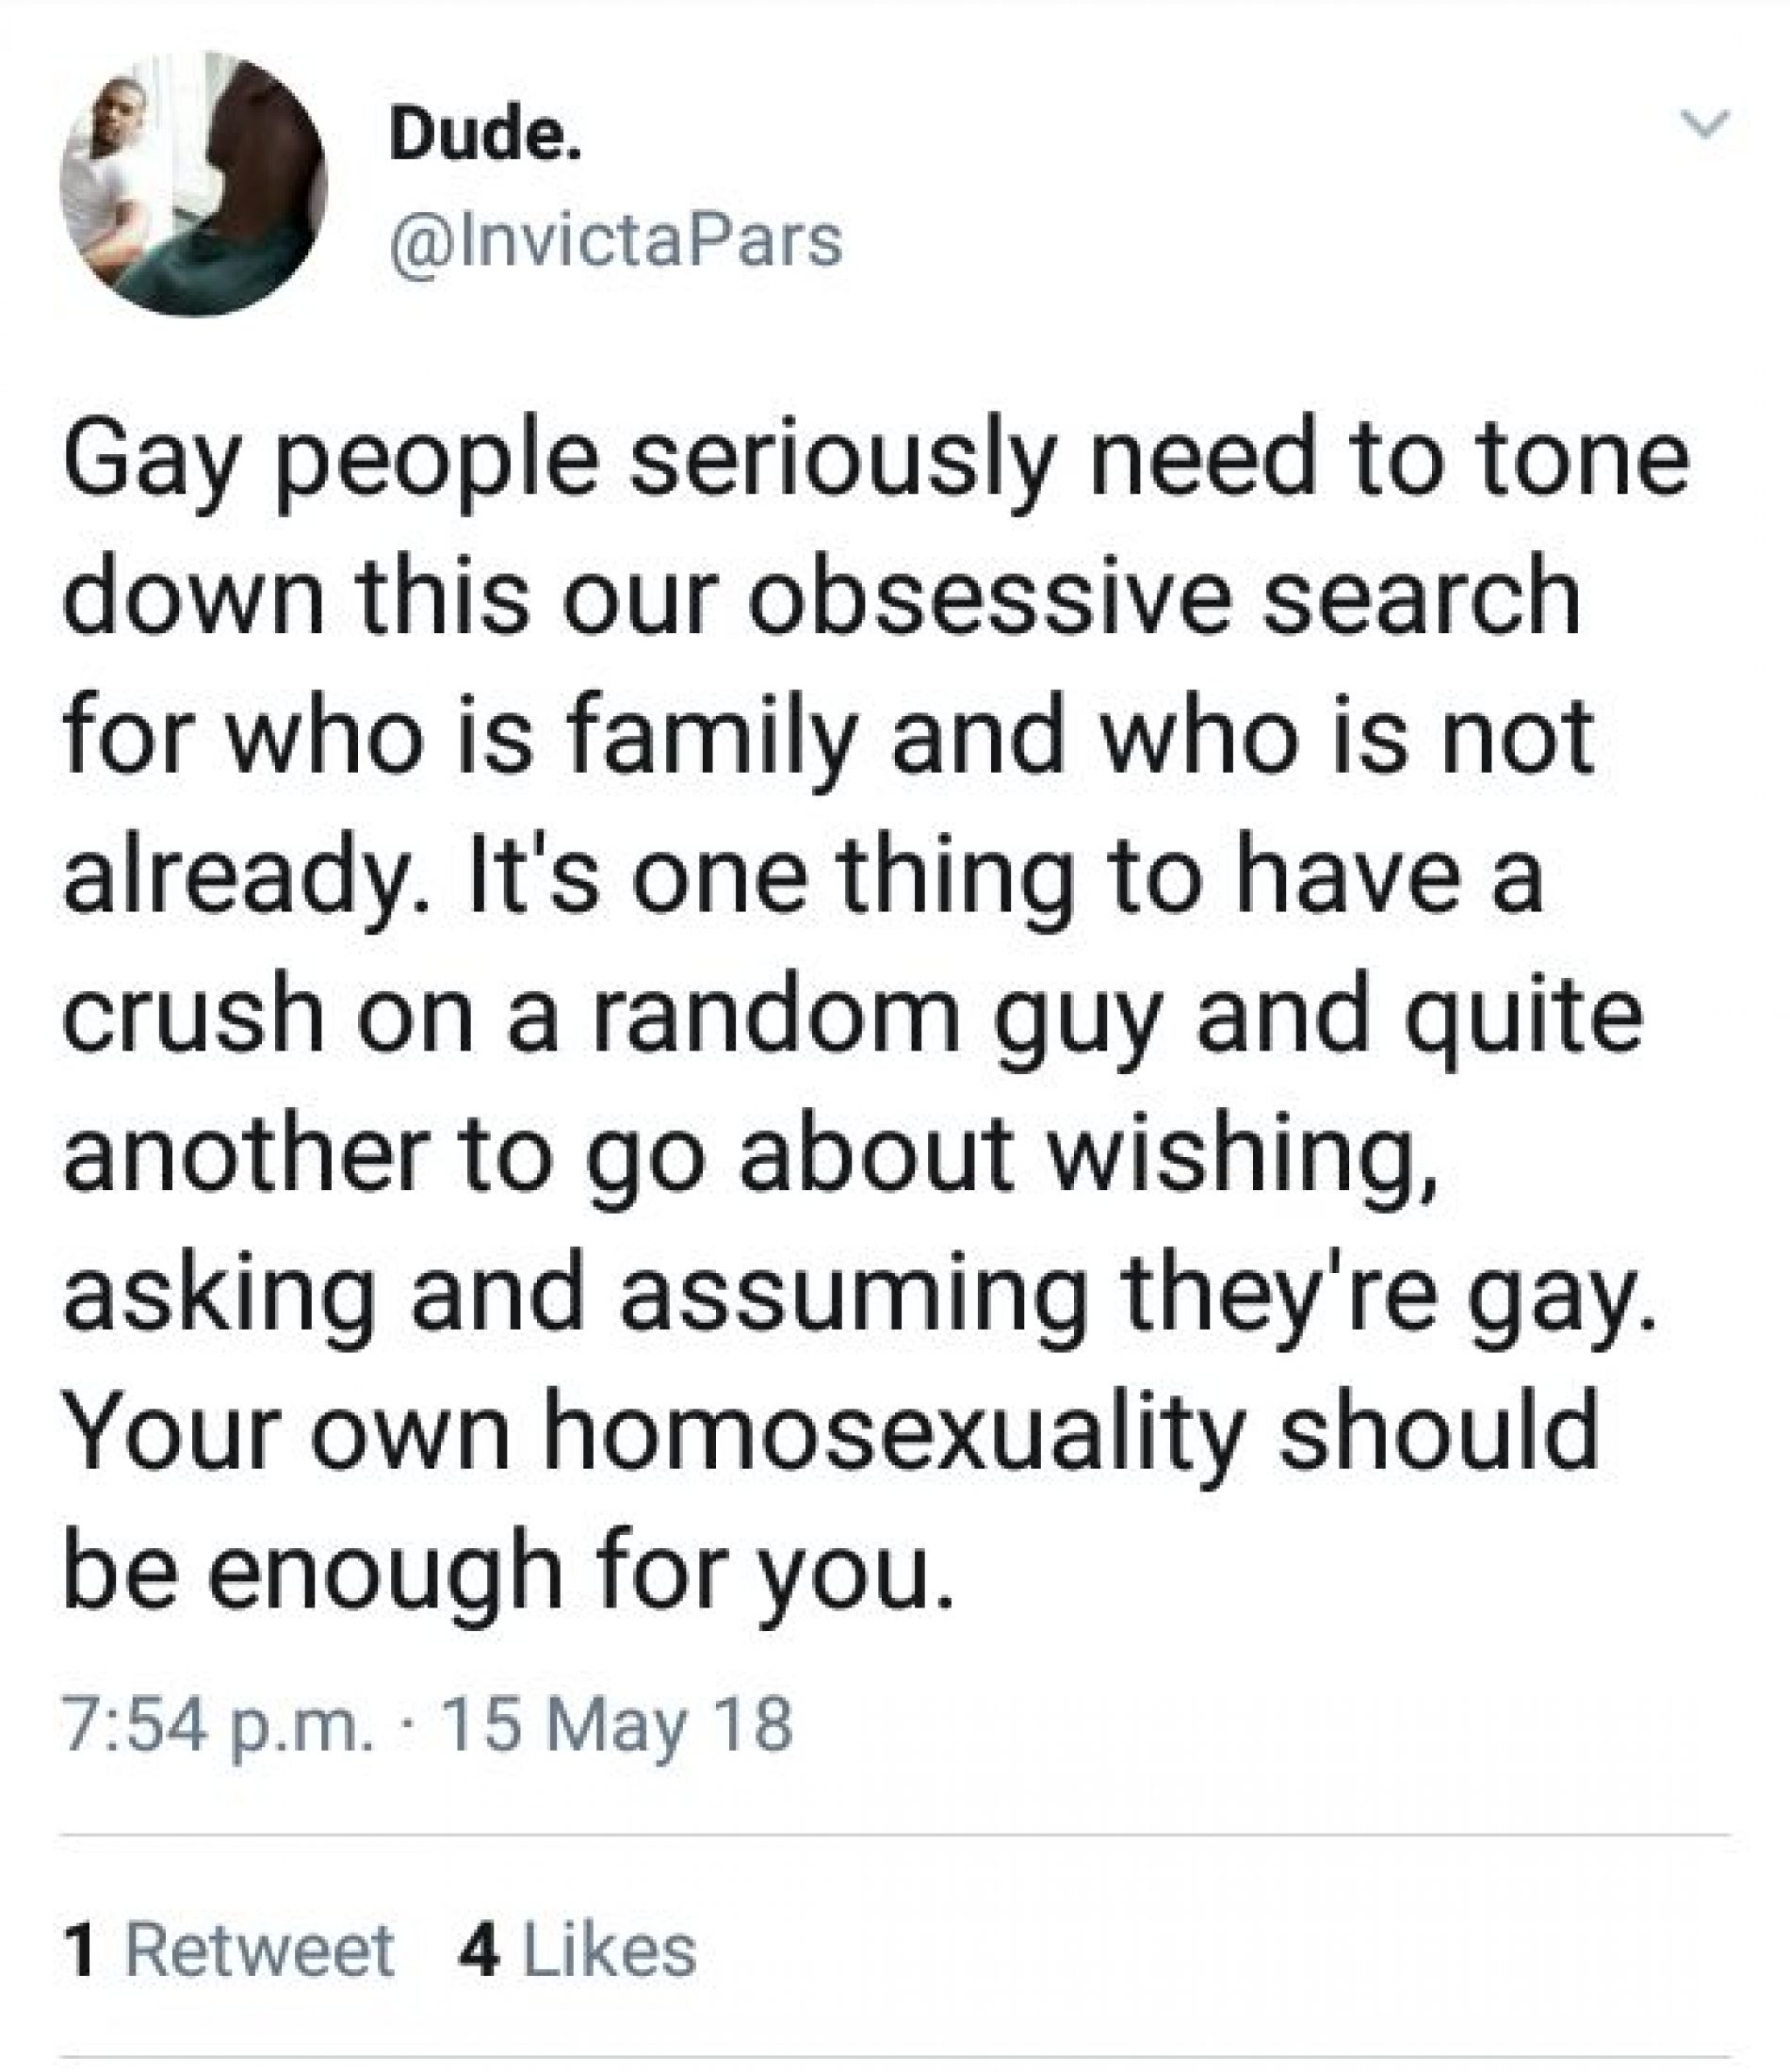 Tweet: About Gay Men And Other Men’s Sexuality